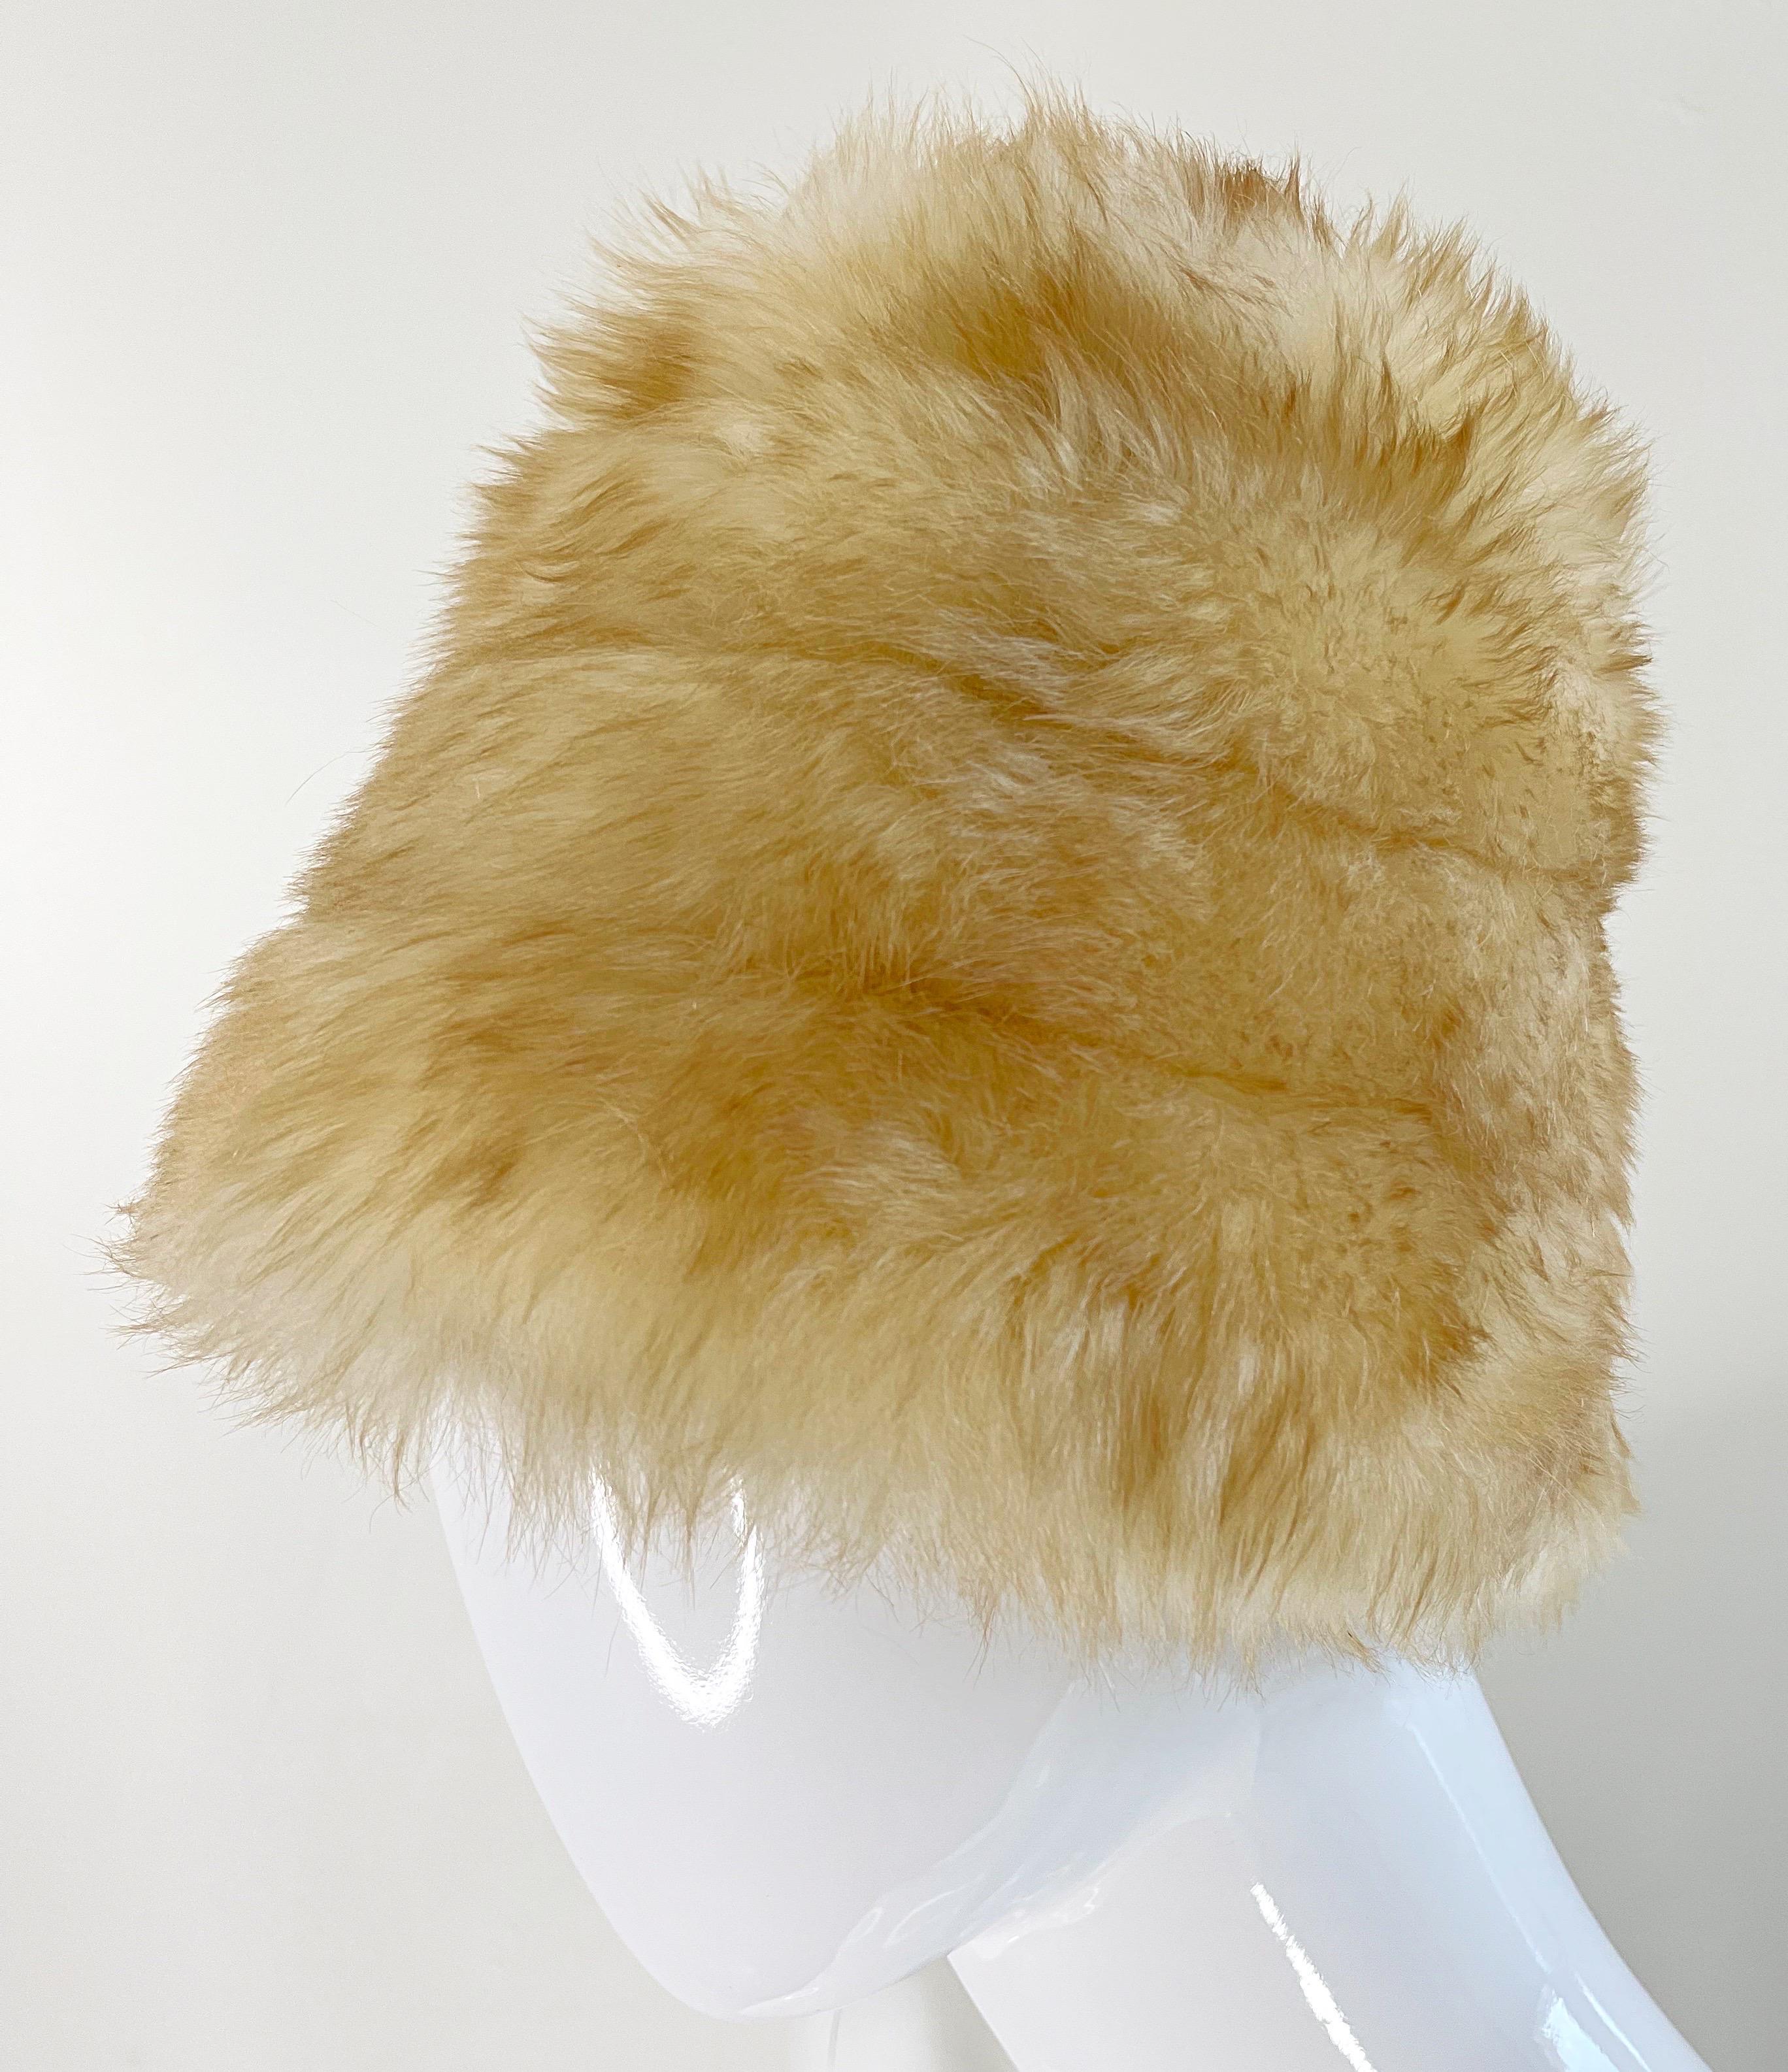 Yves Saint Laurent Fall 1976 Russian Collection Shearling Honey Tan Fur Hat 70s 4